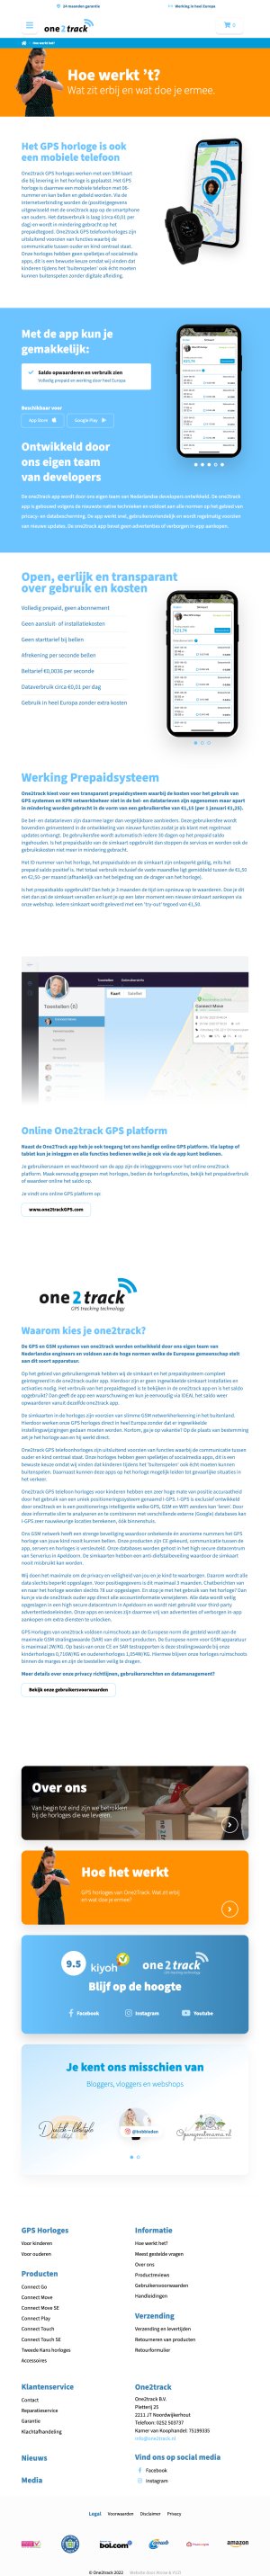 Website One2track